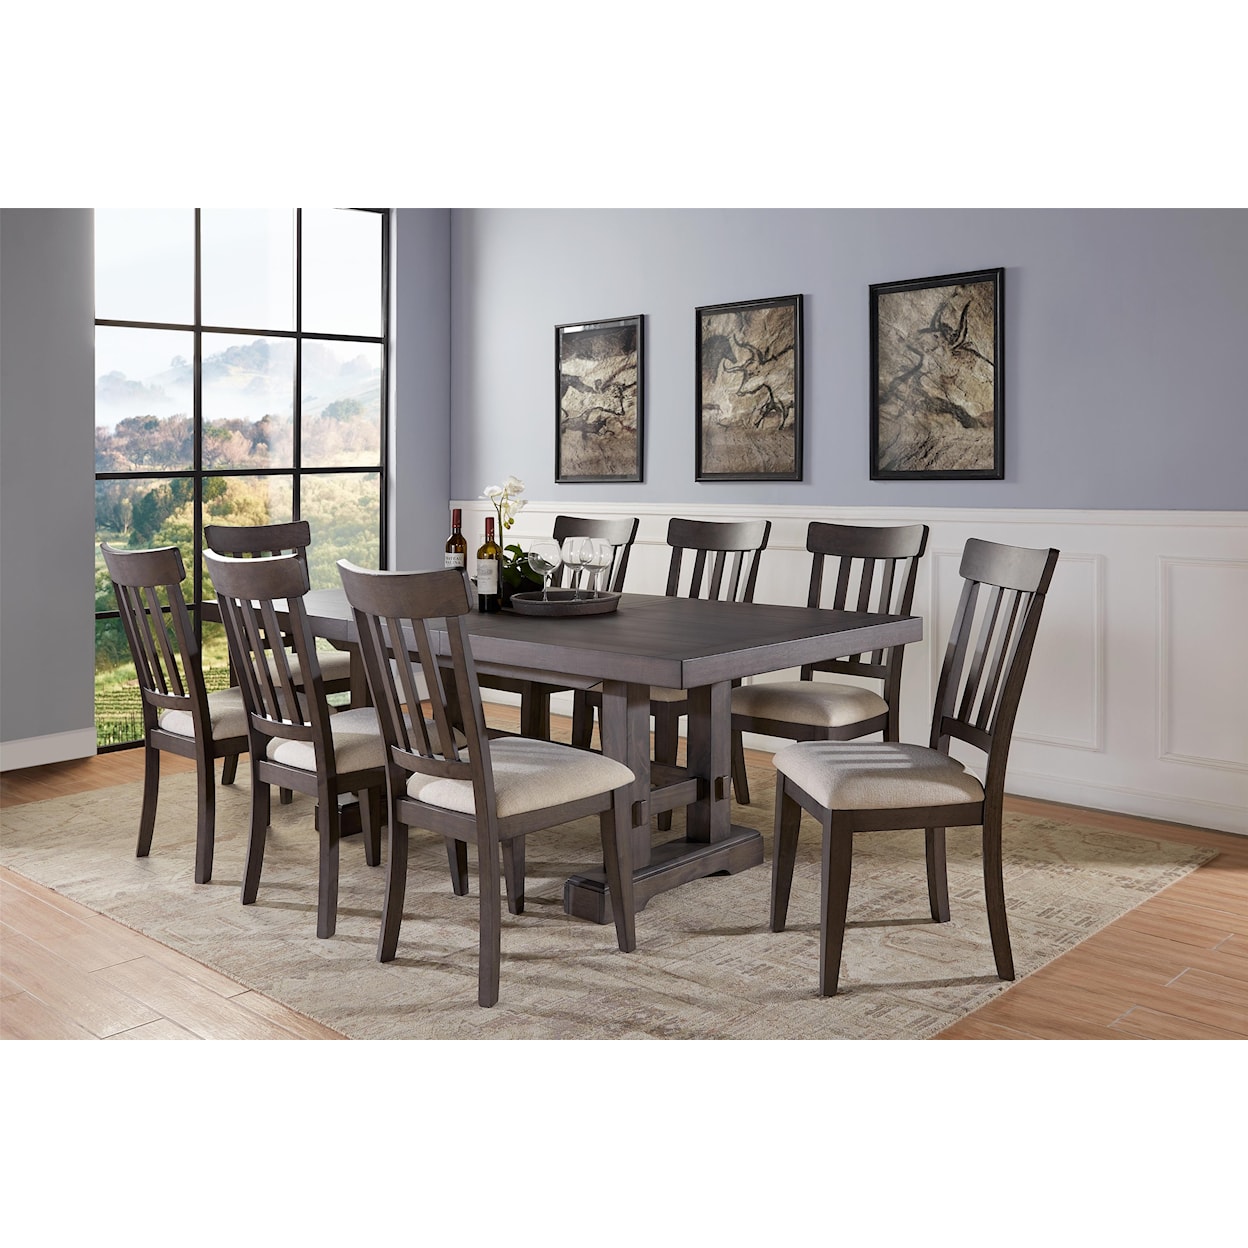 Steve Silver Napa 9-Piece Table and Chair Set